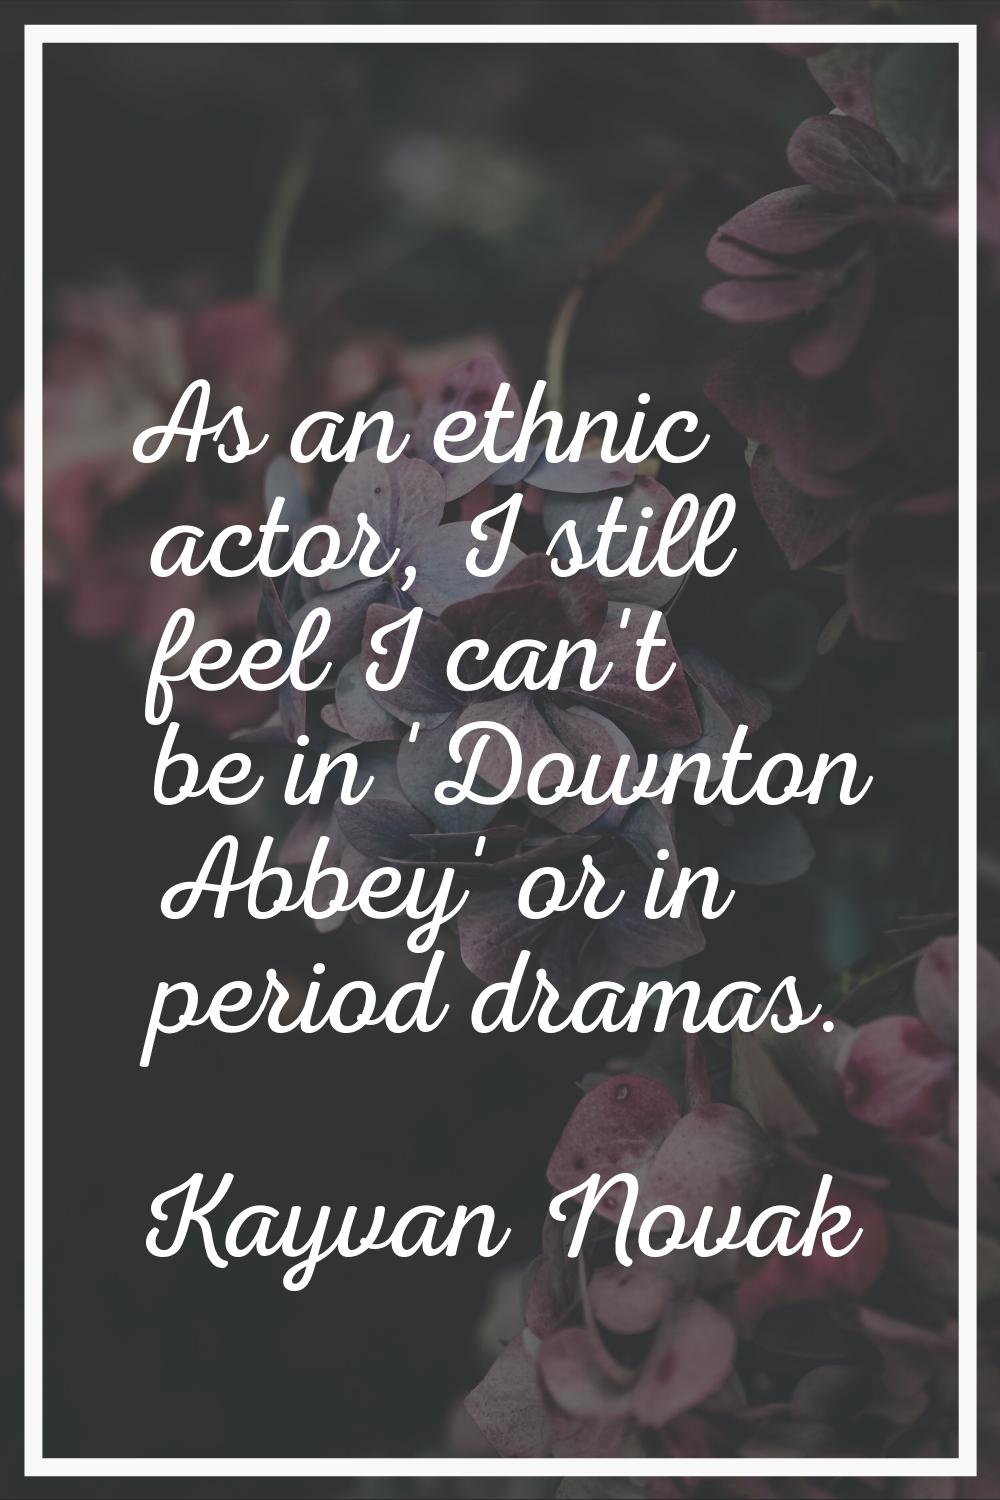 As an ethnic actor, I still feel I can't be in 'Downton Abbey' or in period dramas.